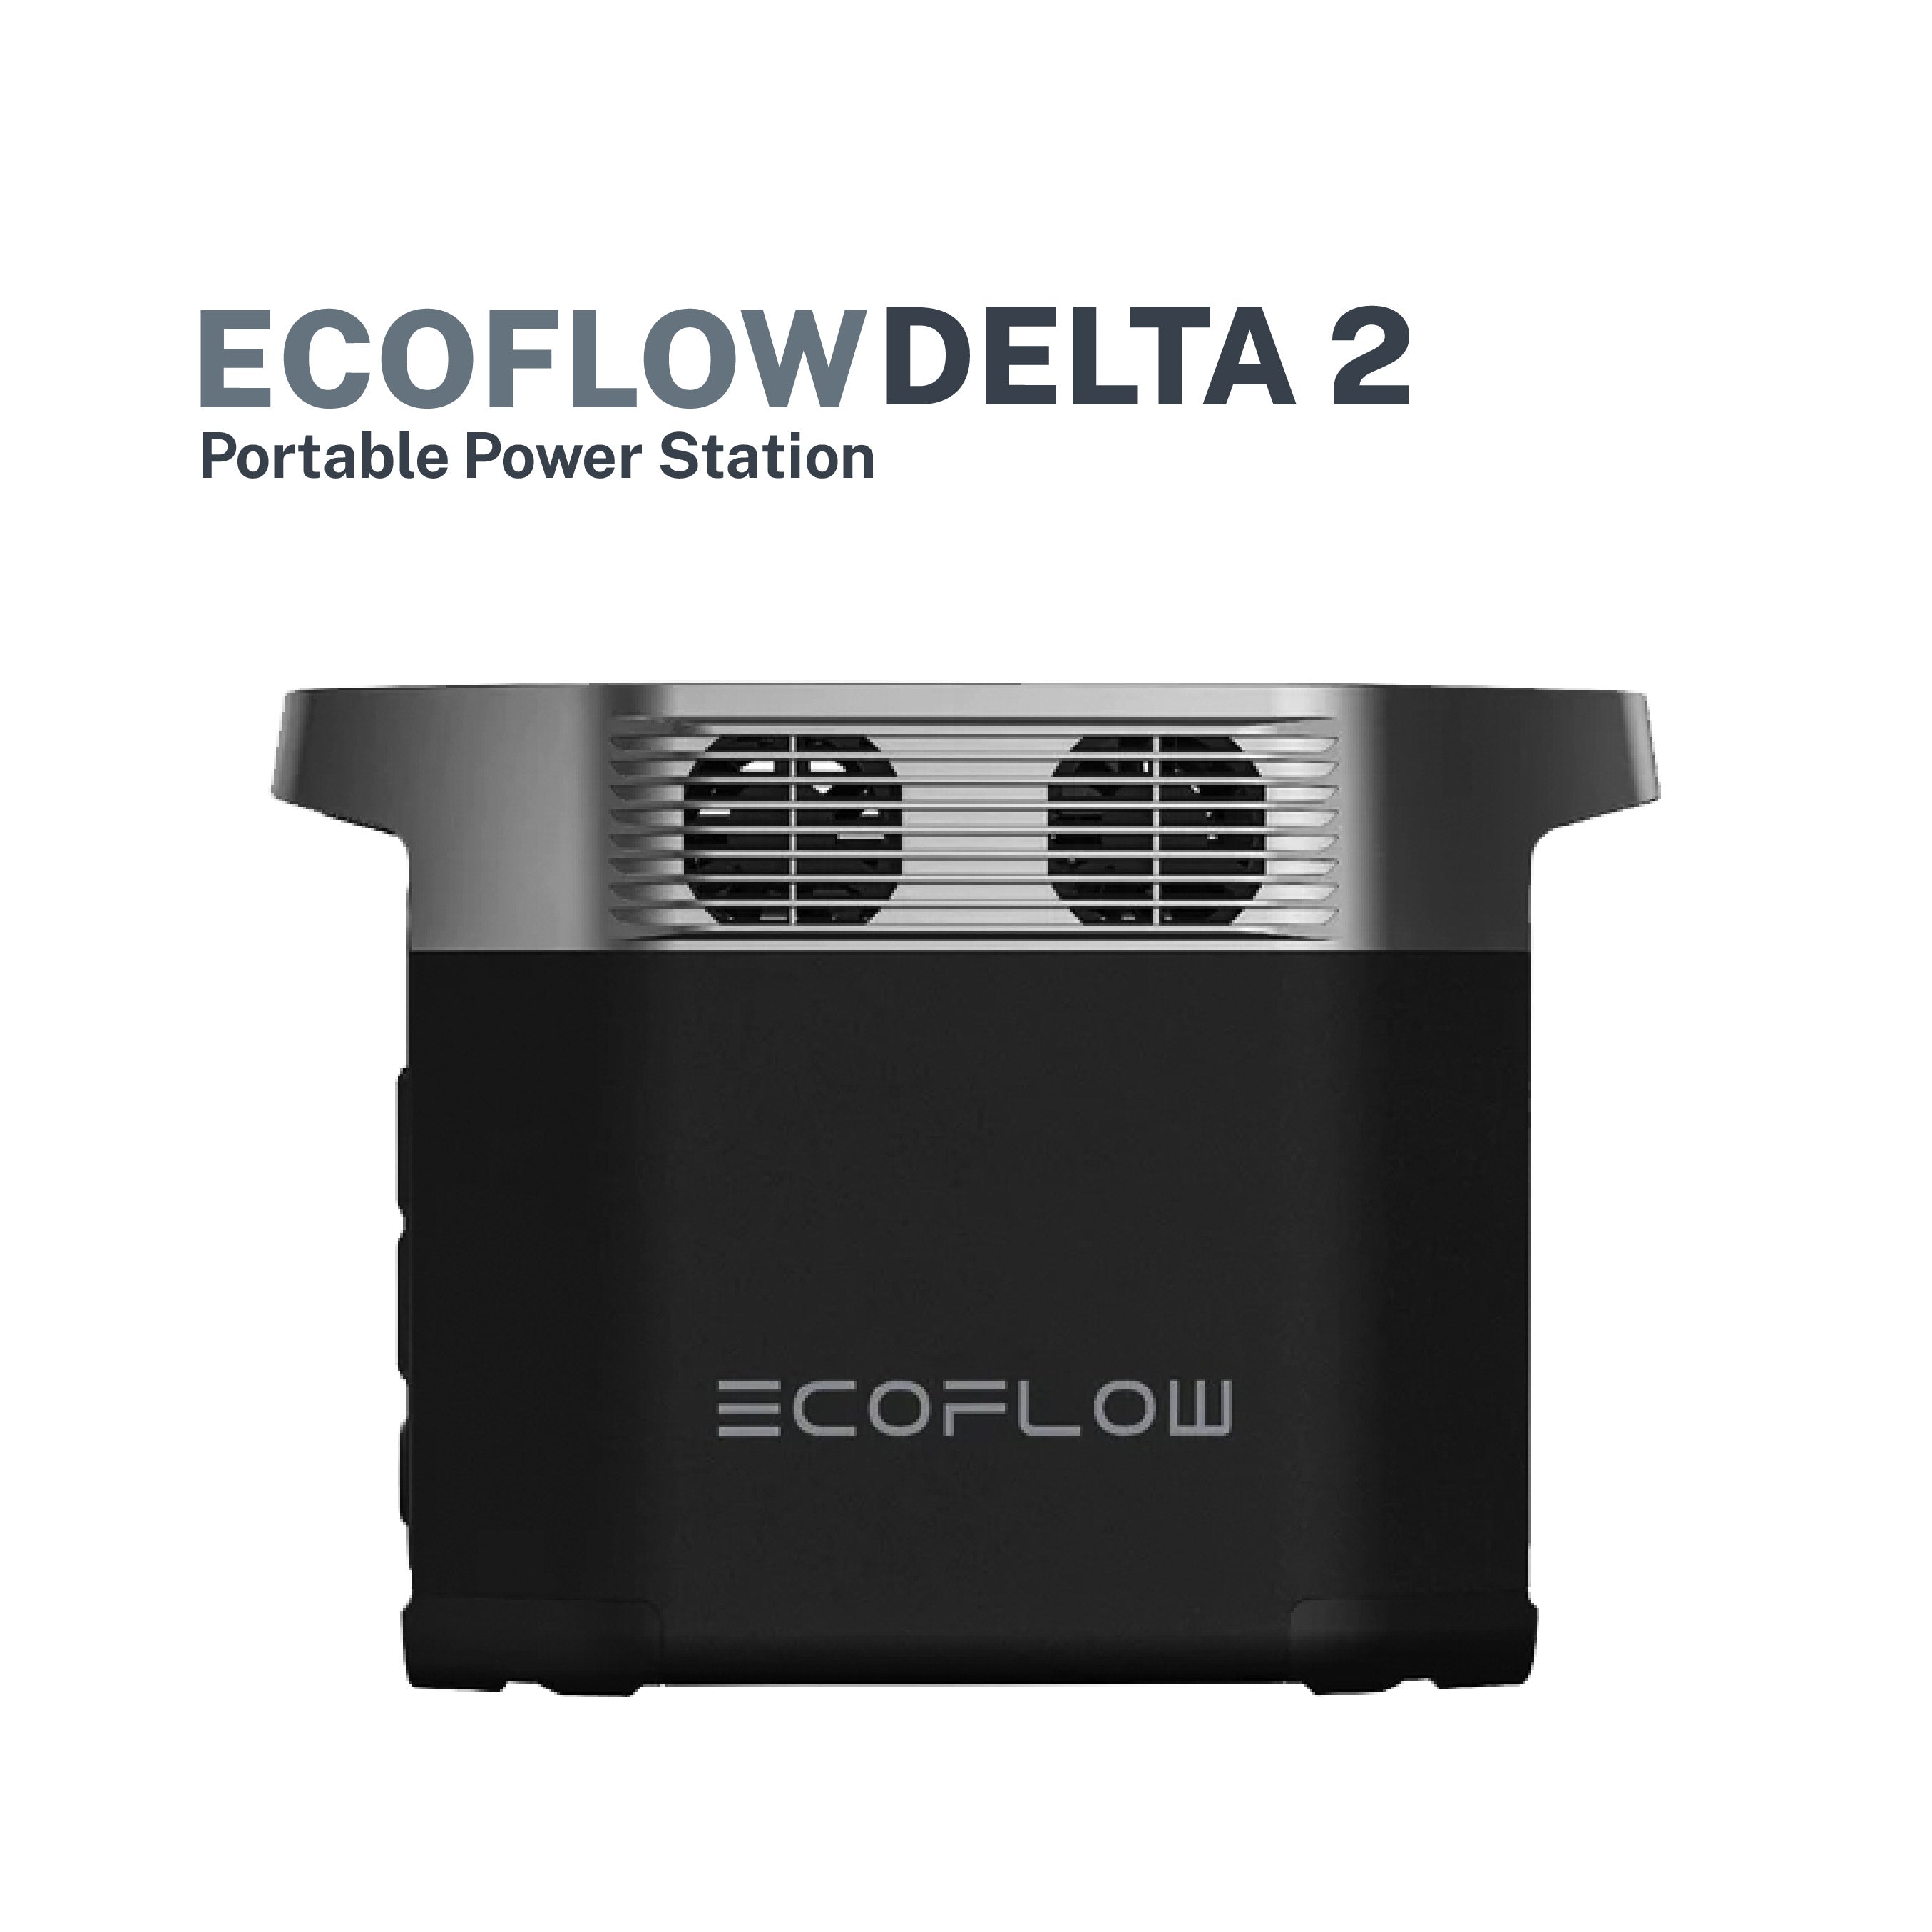 Ecoflow Delta 2 with Delta Max Extra Battery 3000 Wh